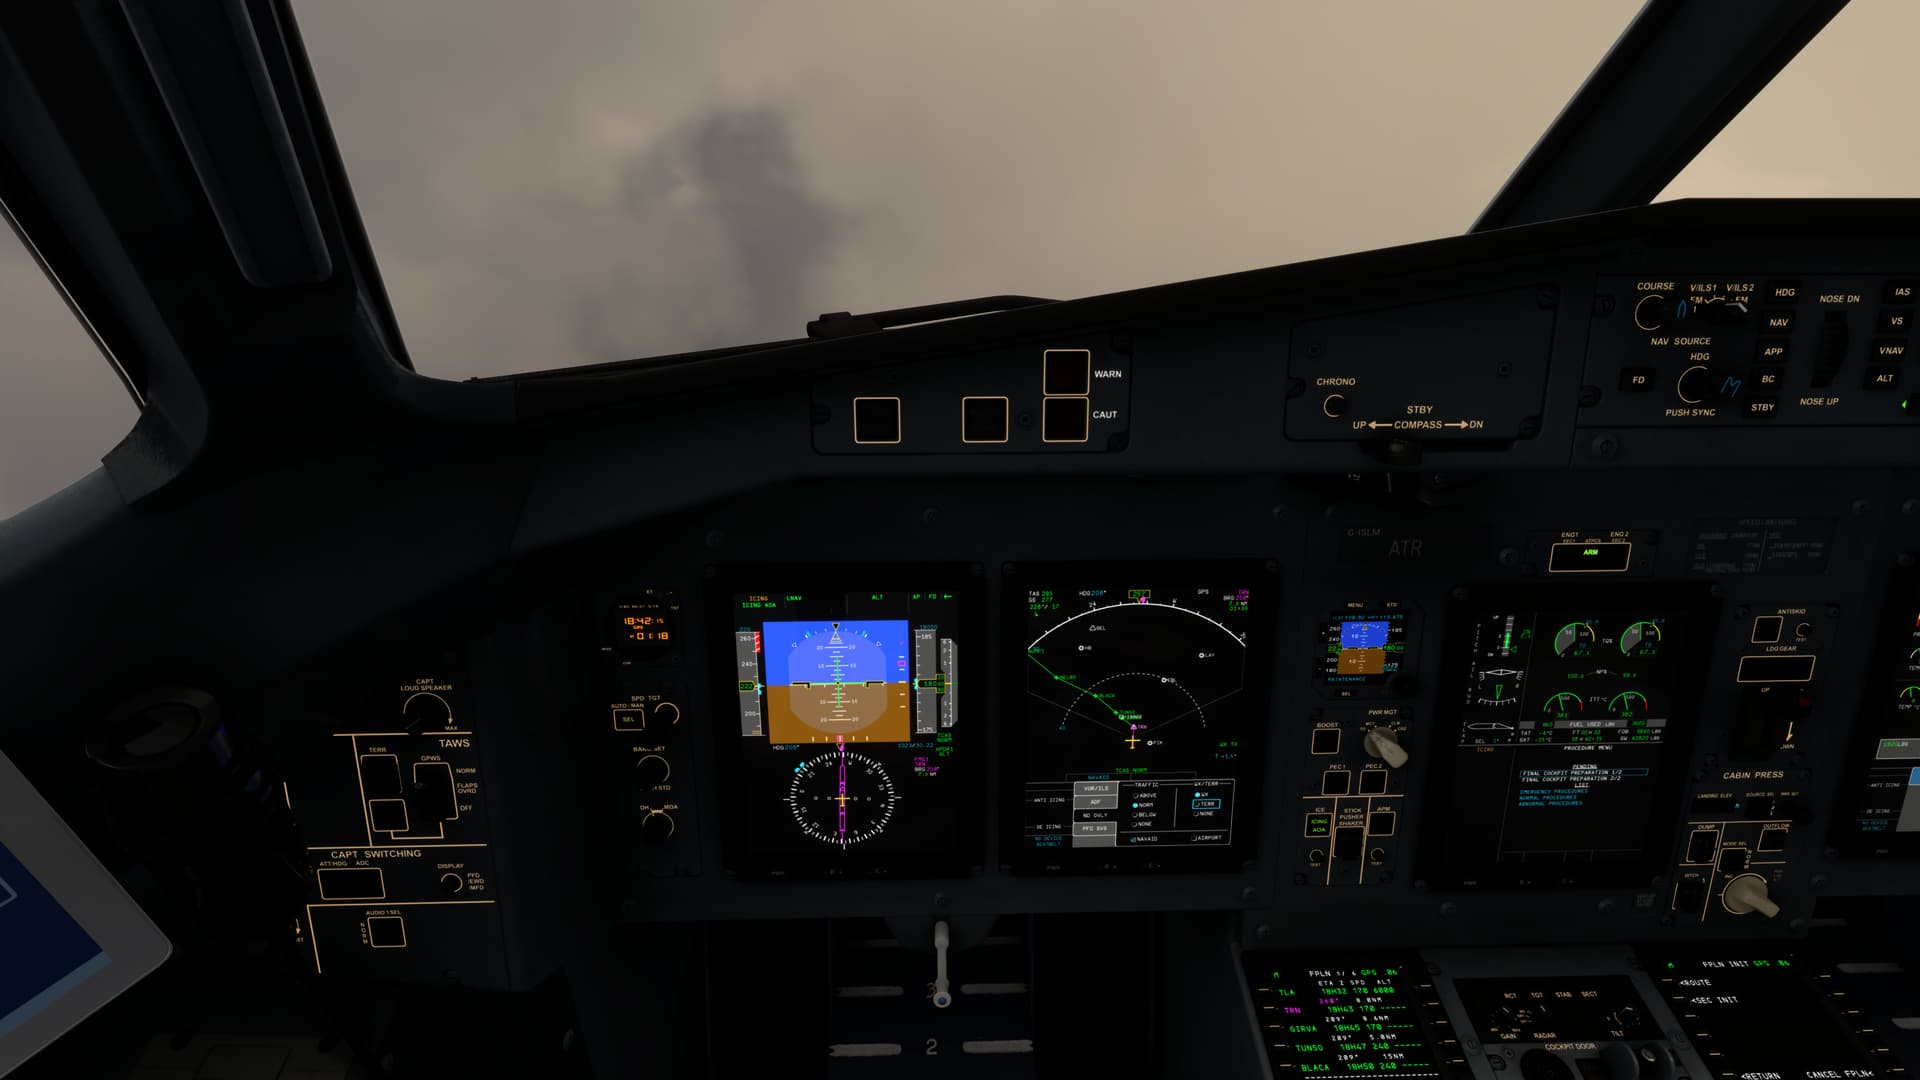 Microsoft Flight Simulator Releases the First Aircraft in the New Expert  Series – the ATR 42-600 and the ATR 72-600 - Xbox Wire